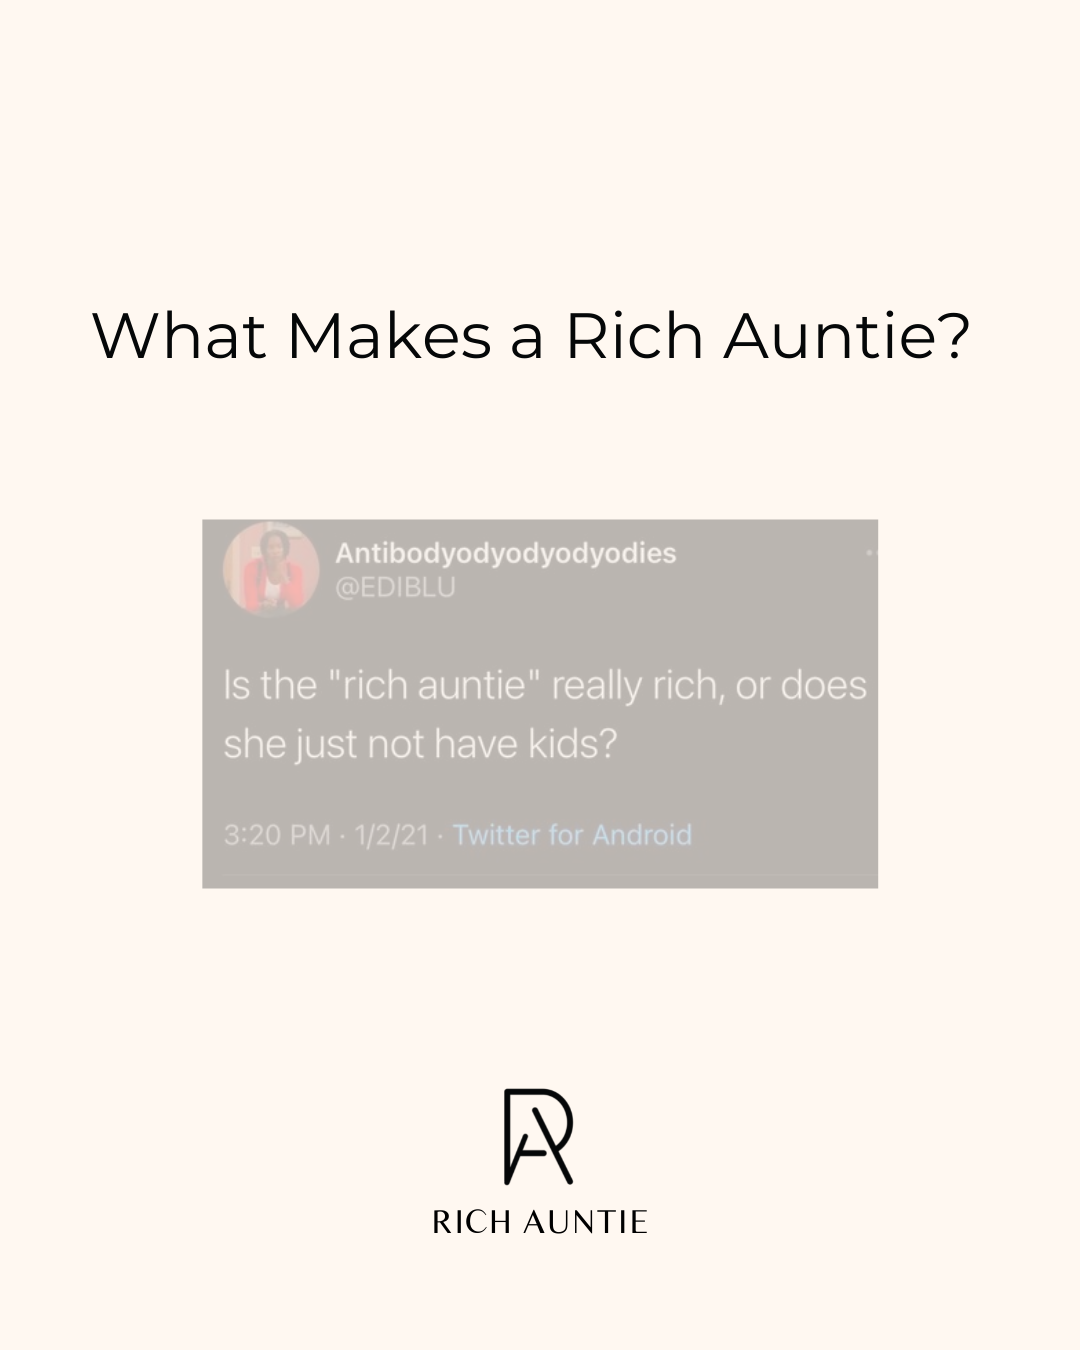 What Makes a Rich Auntie?